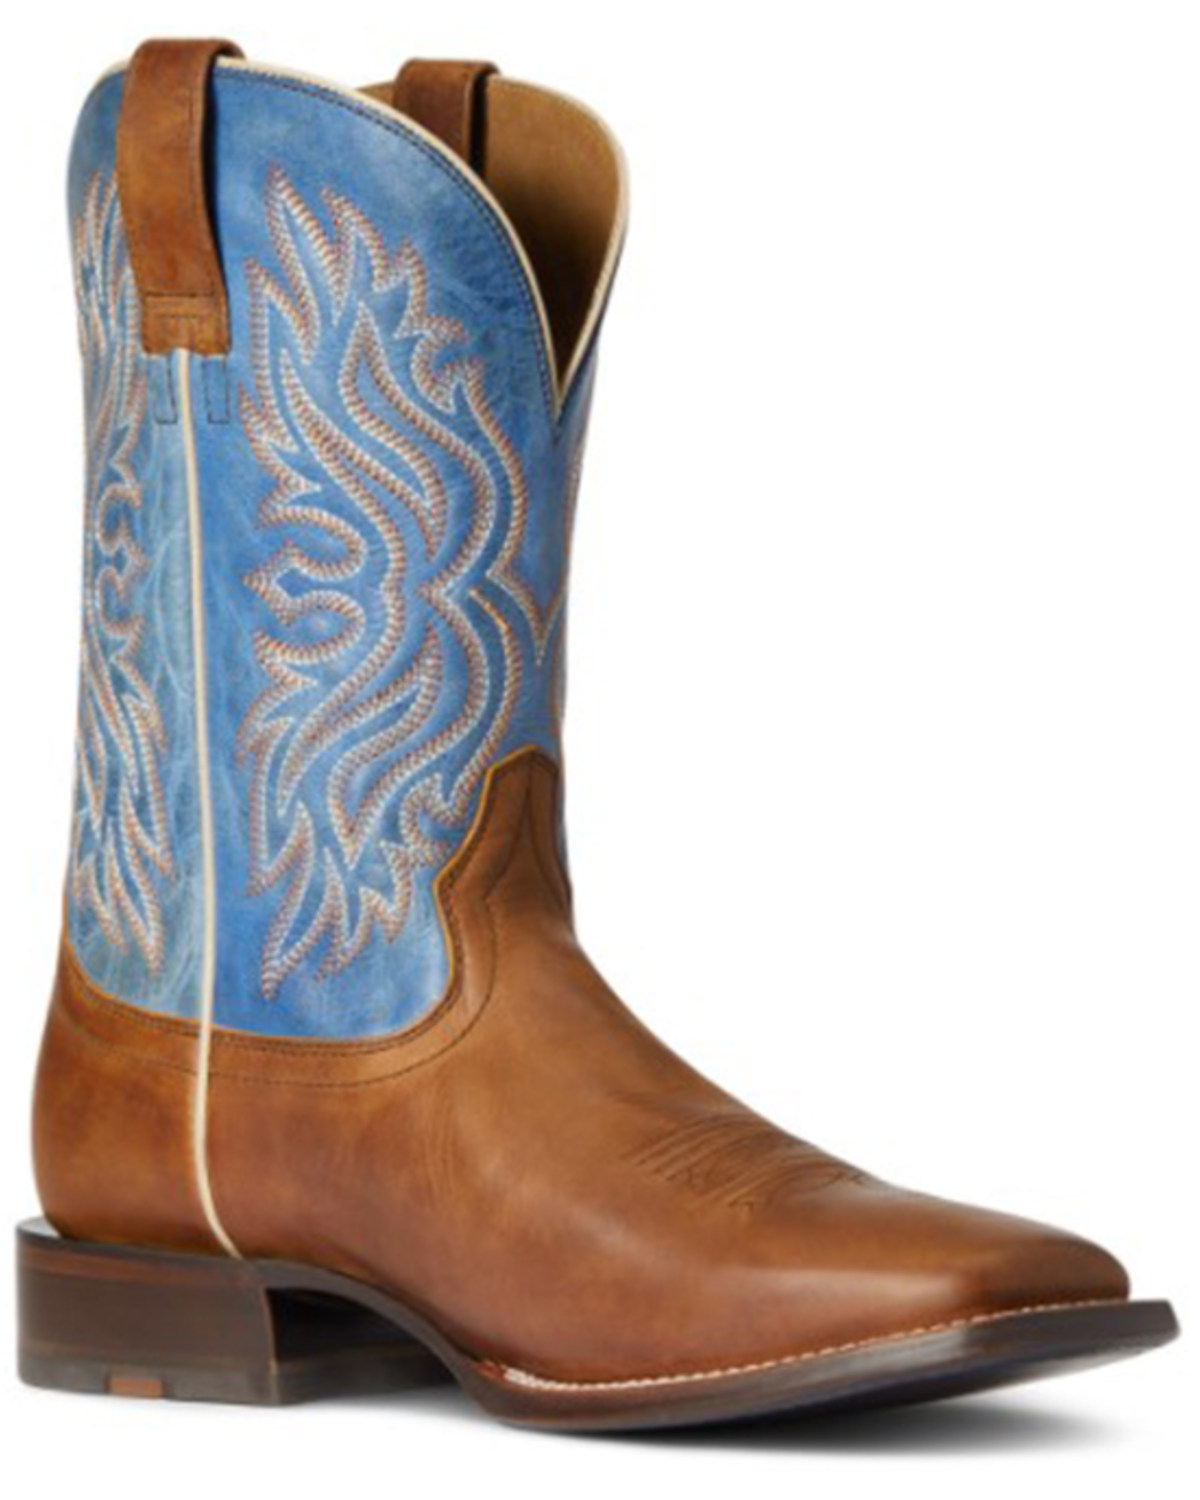 Ariat Men's Circuit Greeley Western Performance Boots - Broad Square Toe